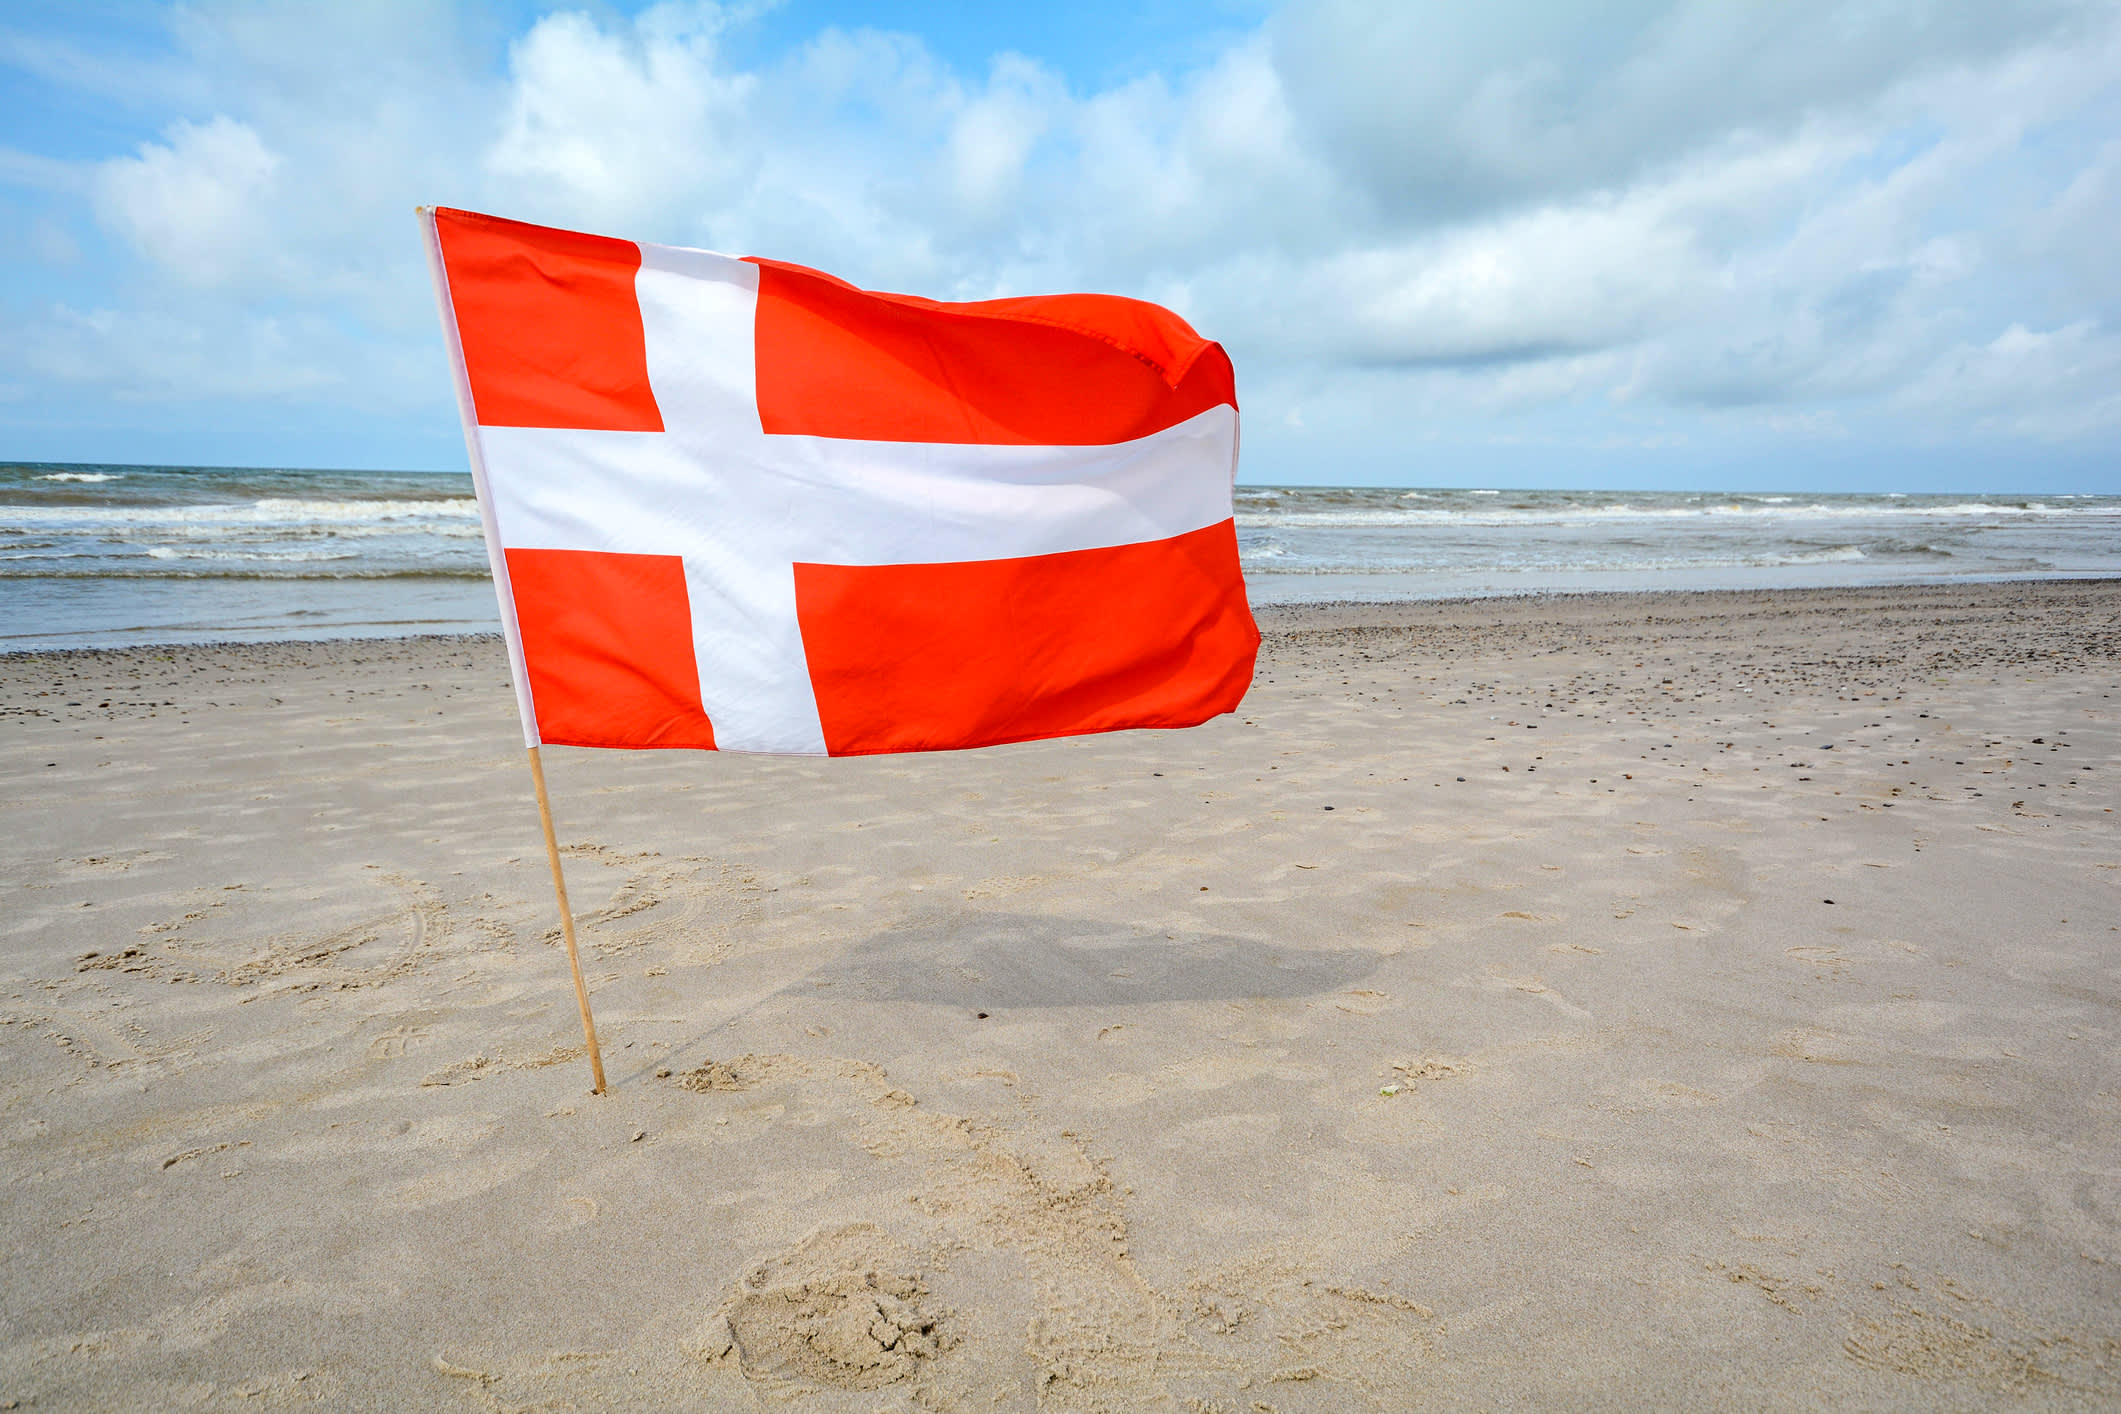 Denmark needs to construct a renewable vitality island within the North Sea